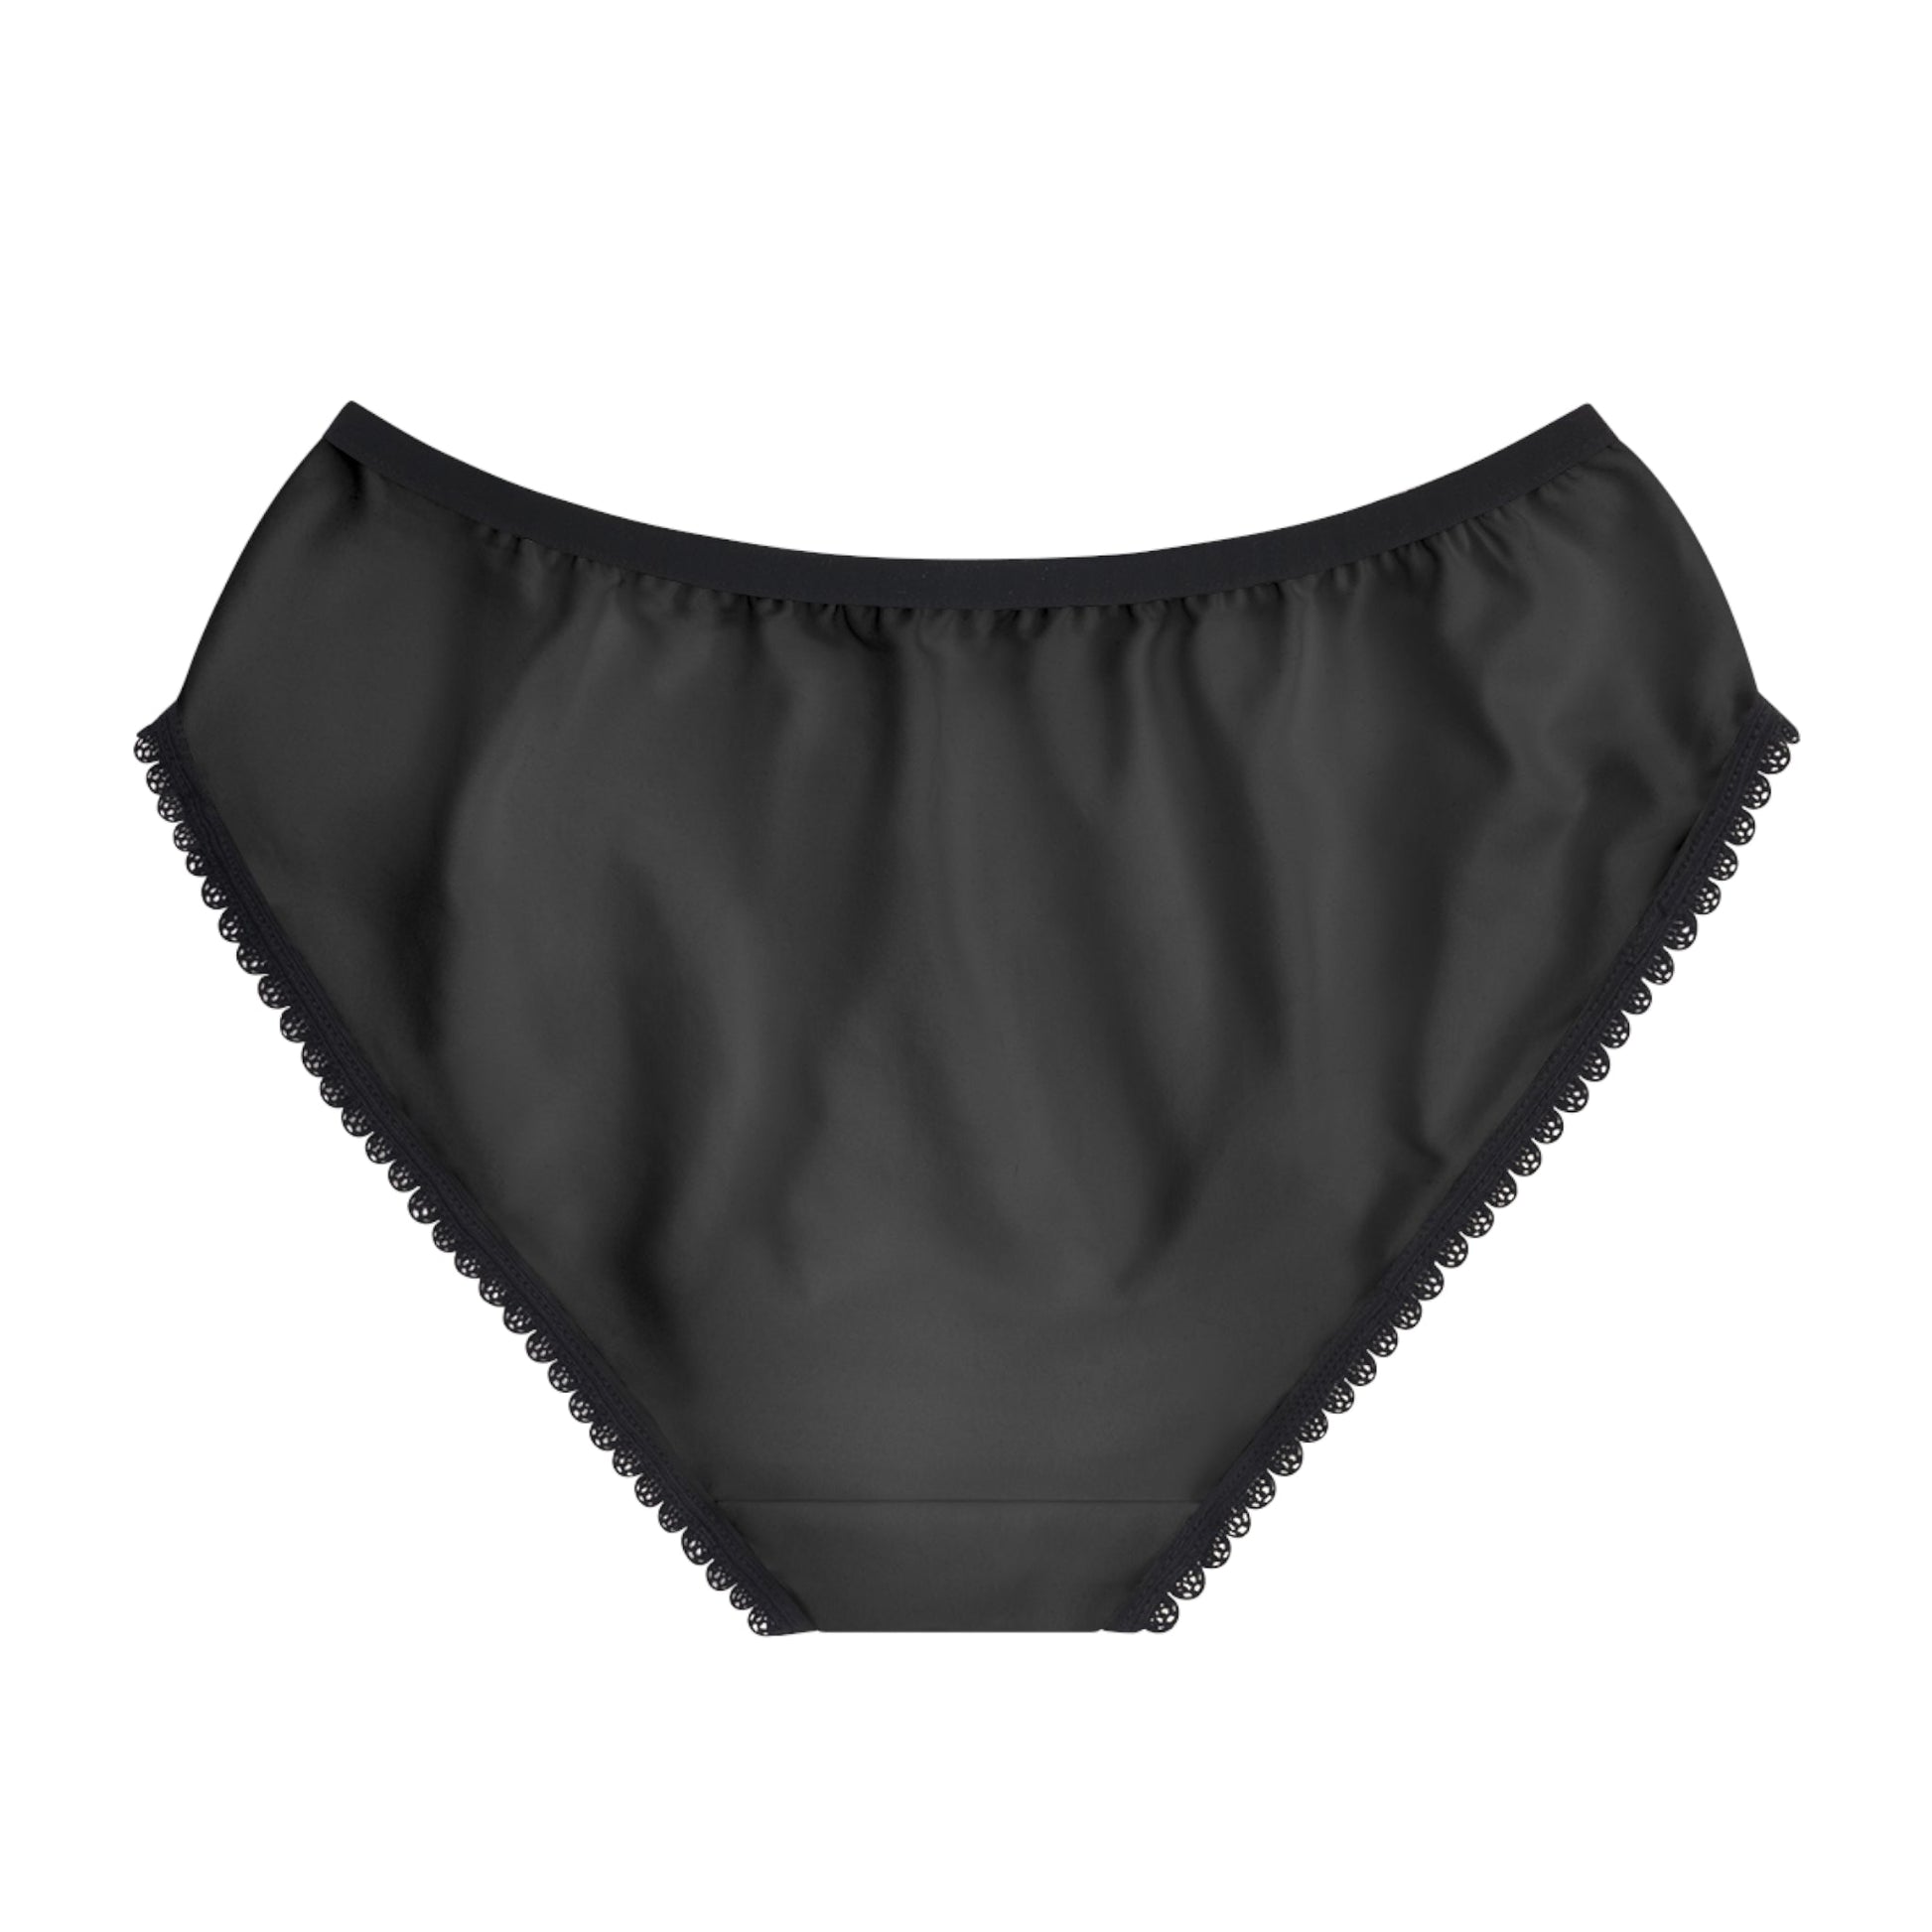 Dog is Waiting Undies - XS / Black stitching All Over Prints